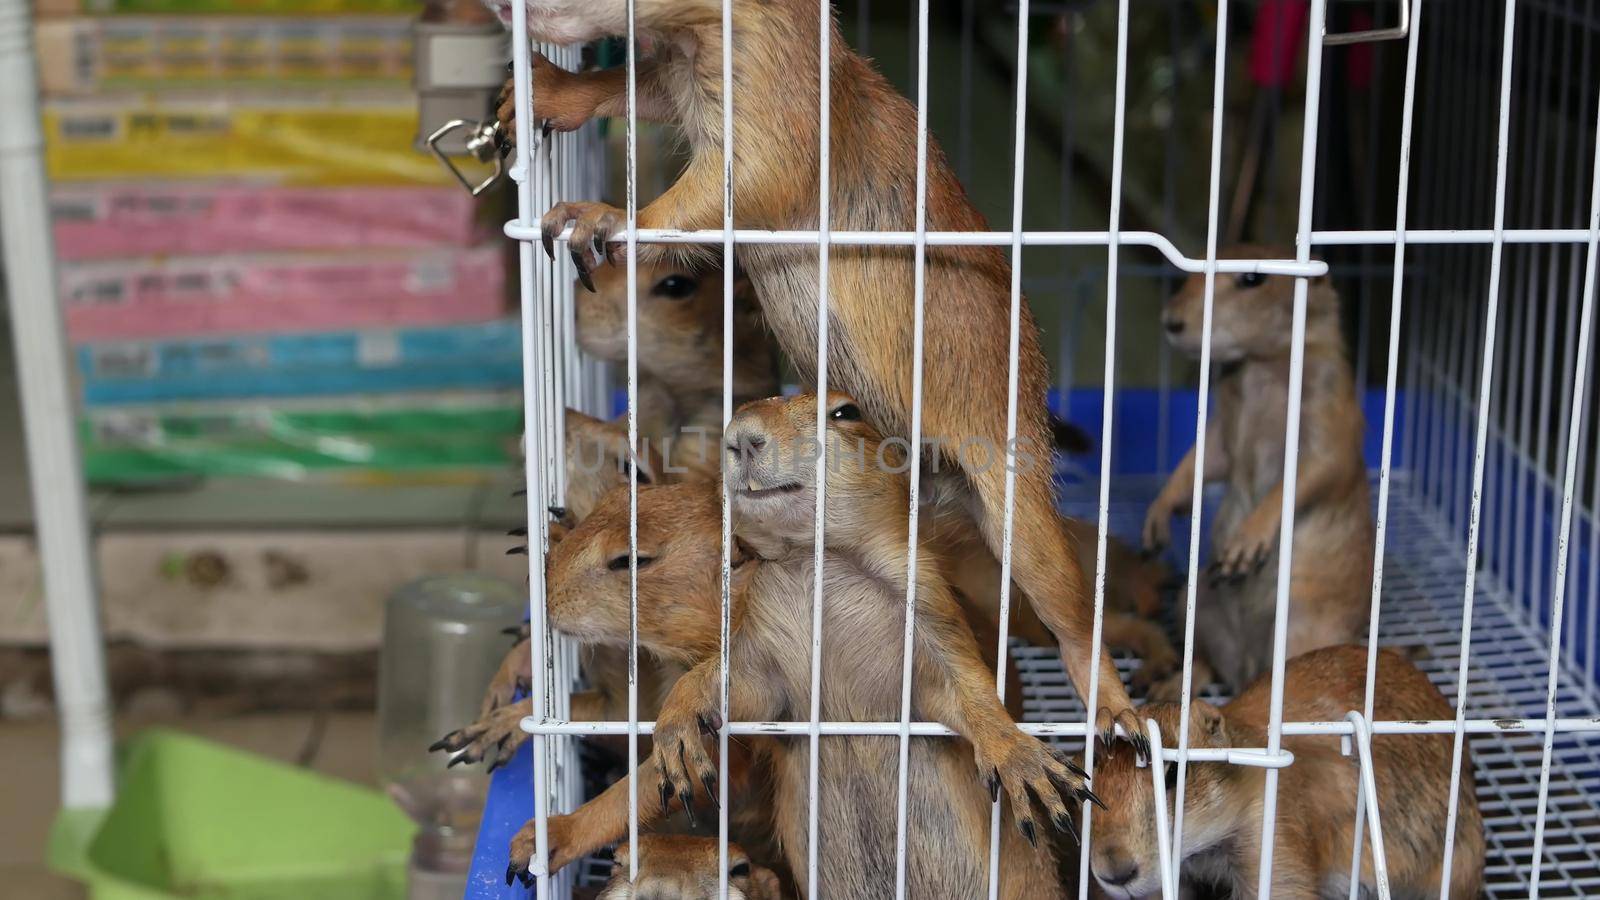 Unhappy cute prairie dog cub suffering, cage on market. Pets for sale. Depressed groundhog asking for food. Funny paws looking for help. Animals standing behind bars. Caged hog family with sad eyes